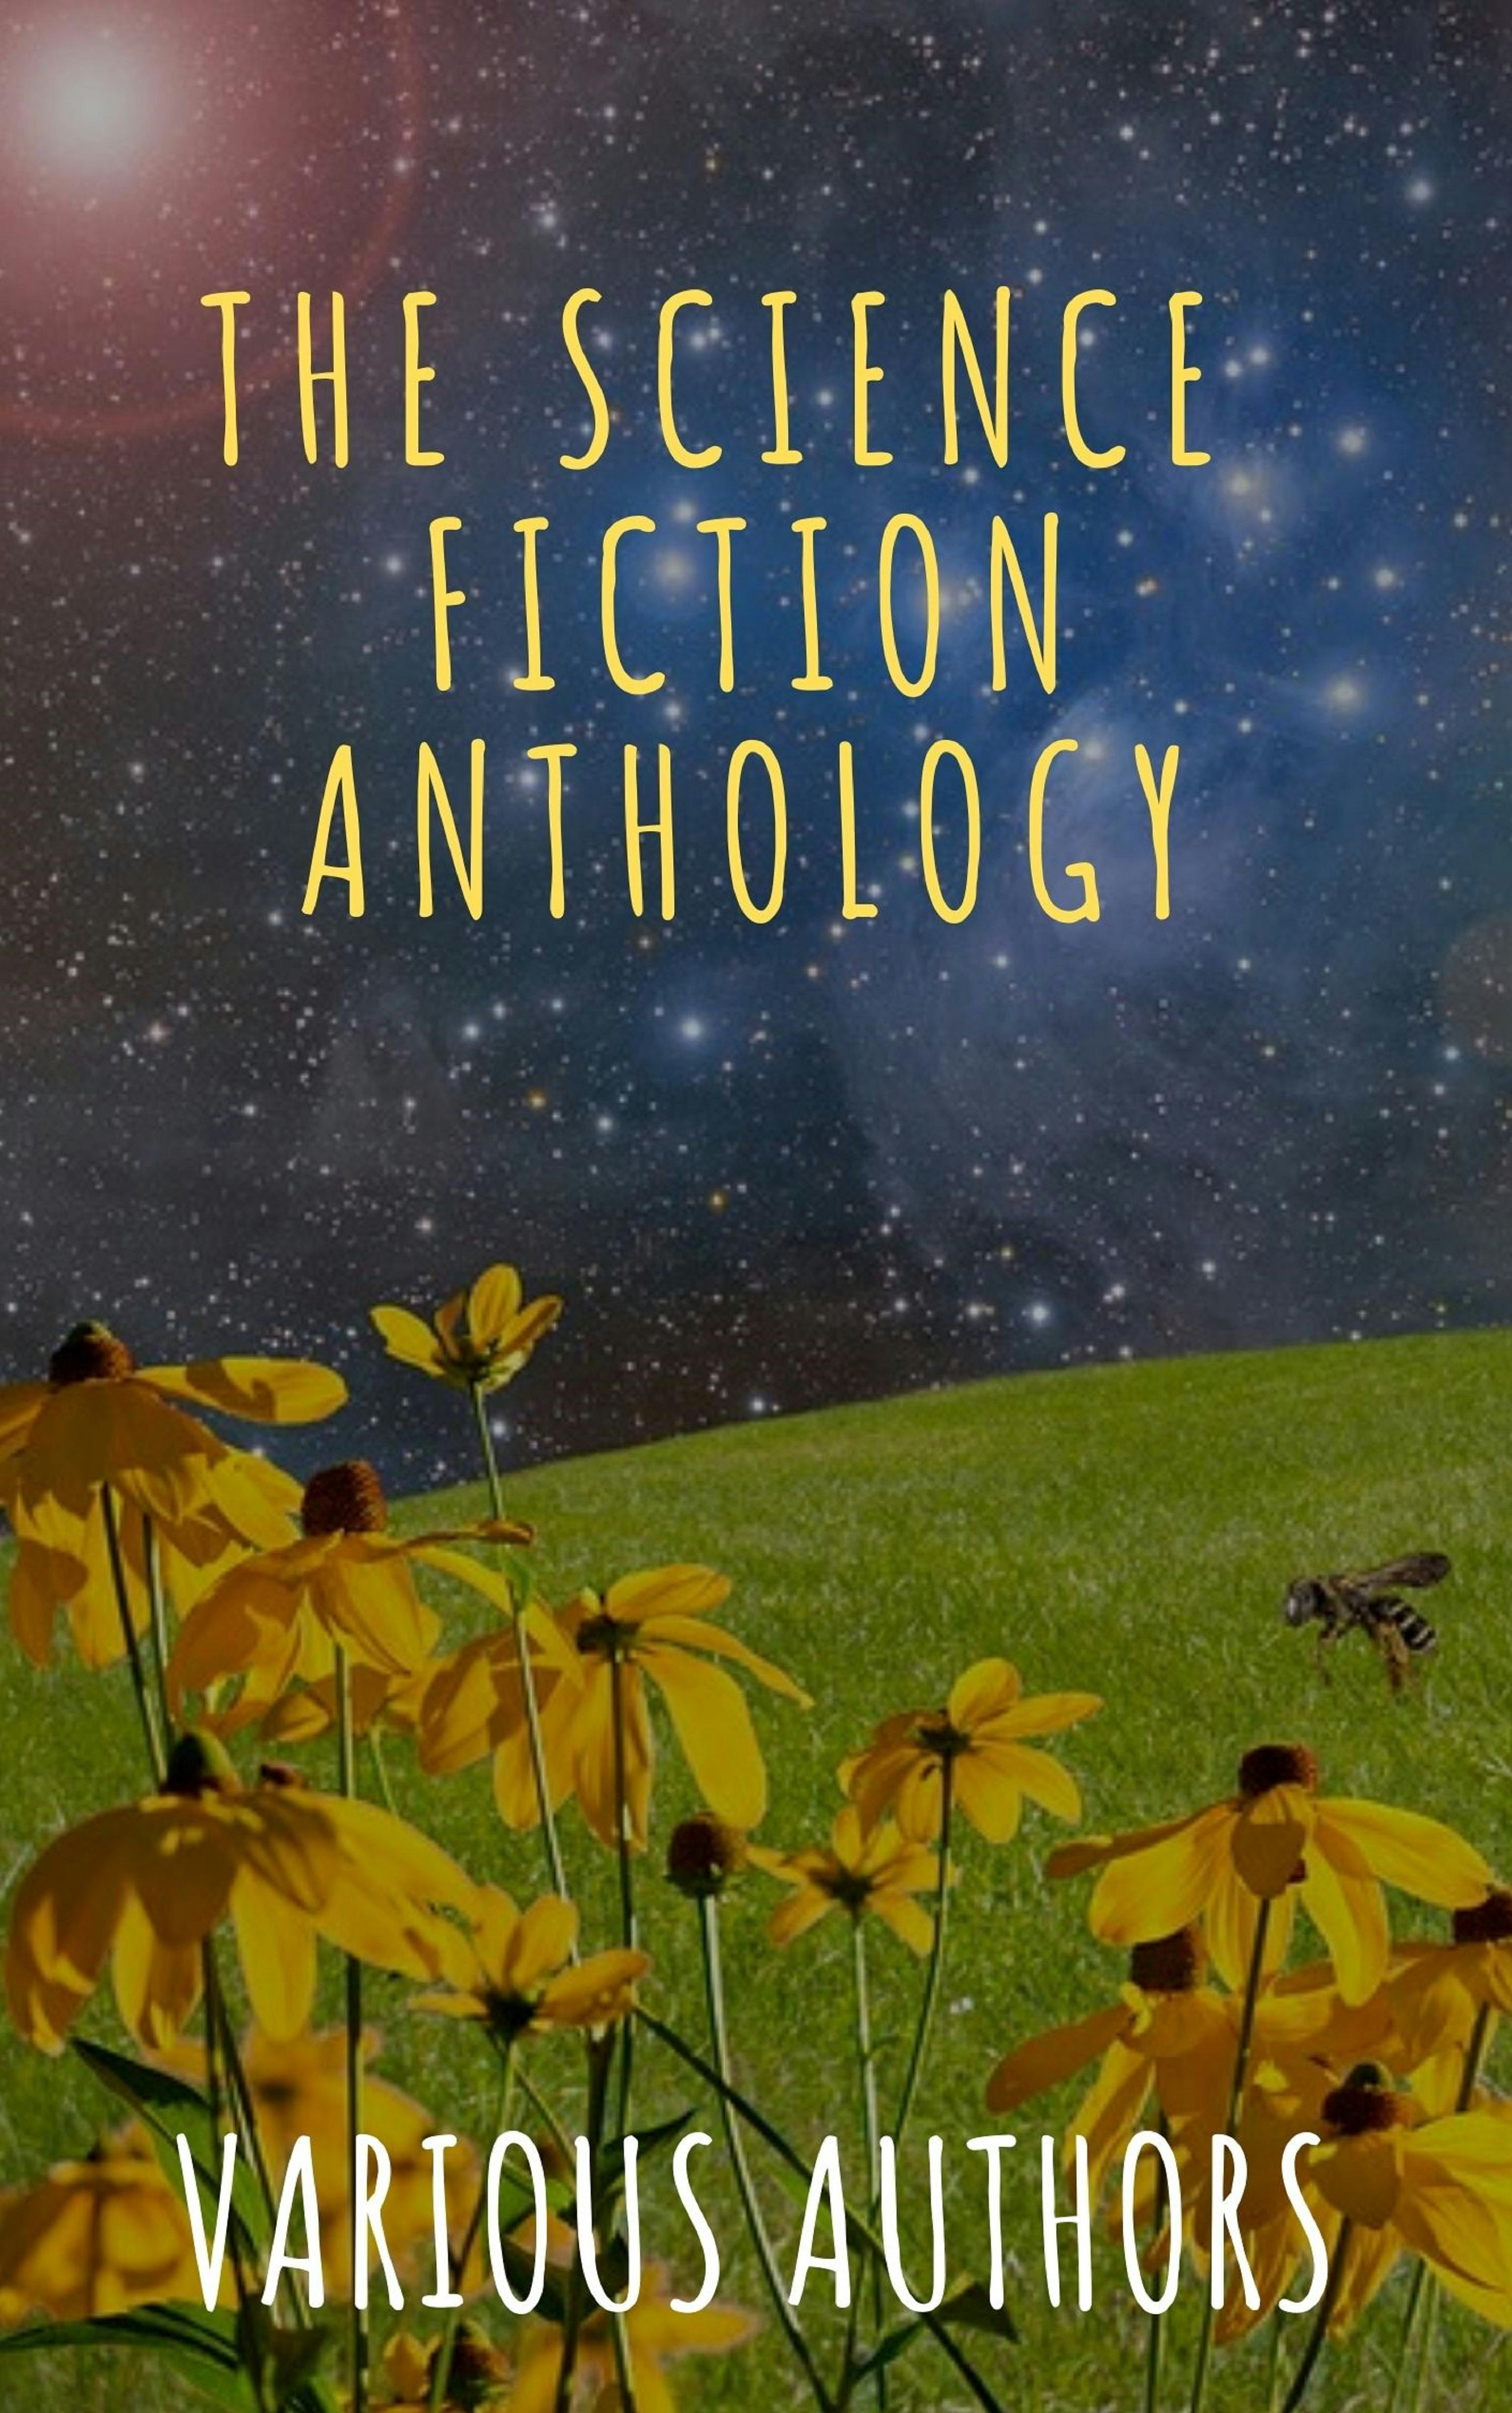 The Science Fiction Anthology - Murray Leinster, Philip K. Dick, Lester del Rey, Ben Bova, Marion Zimmer Bradley, Fritz Leiber, The griffin classics, Andre Norton, Harry Harrison